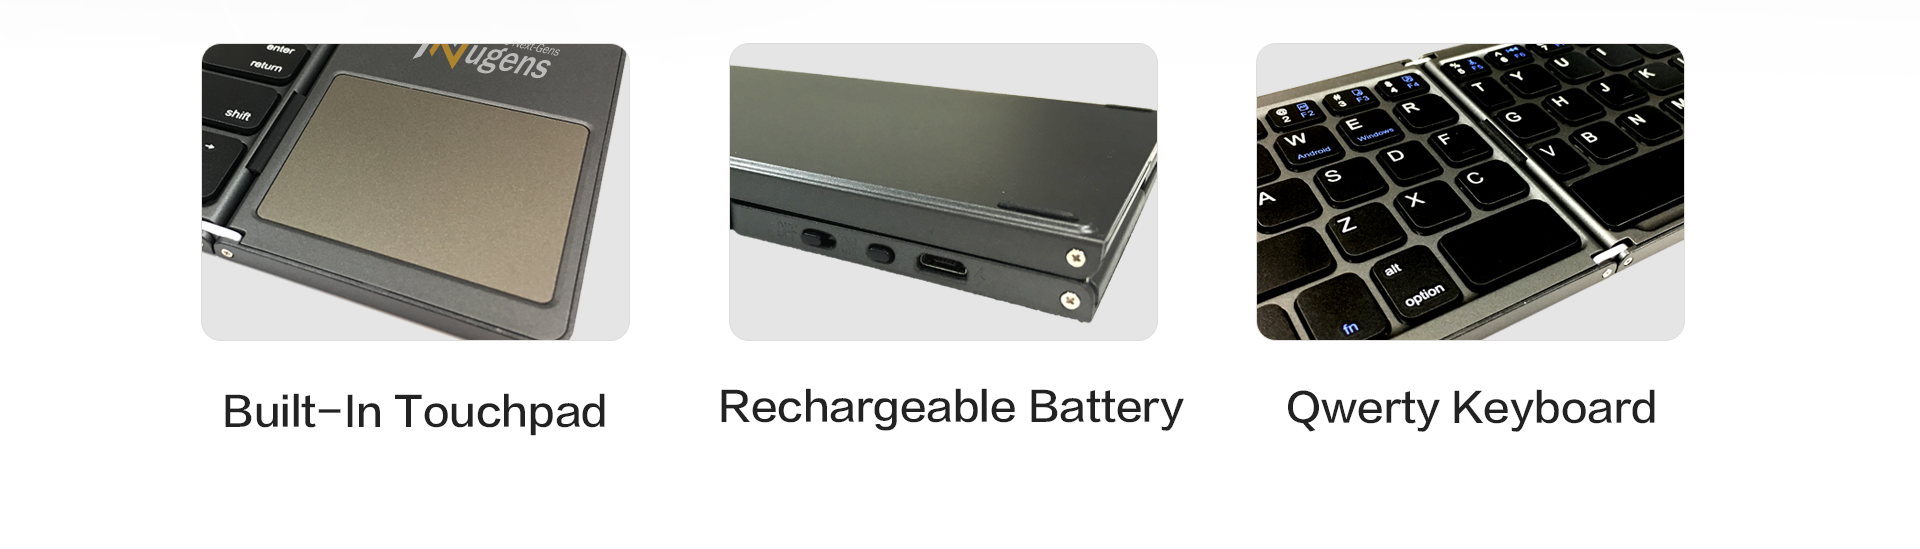 Built-In Touchpad、Rechargeable Battery